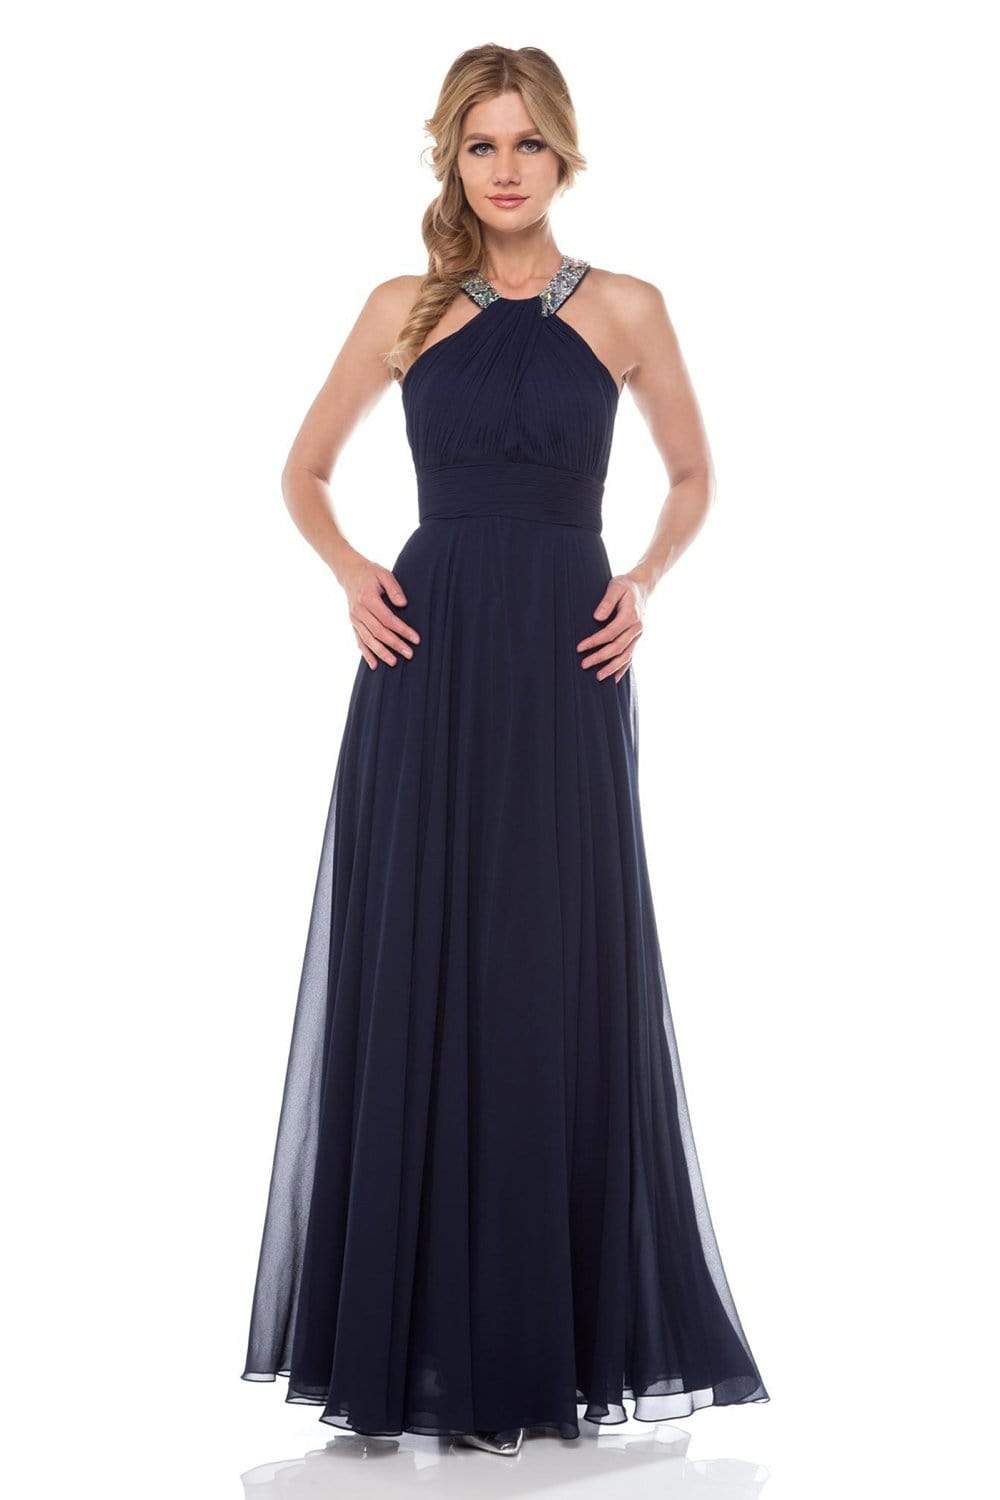 Glow by Colors - G183 Gem Beaded Halter Chiffon Evening Dress Special Occasion Dress